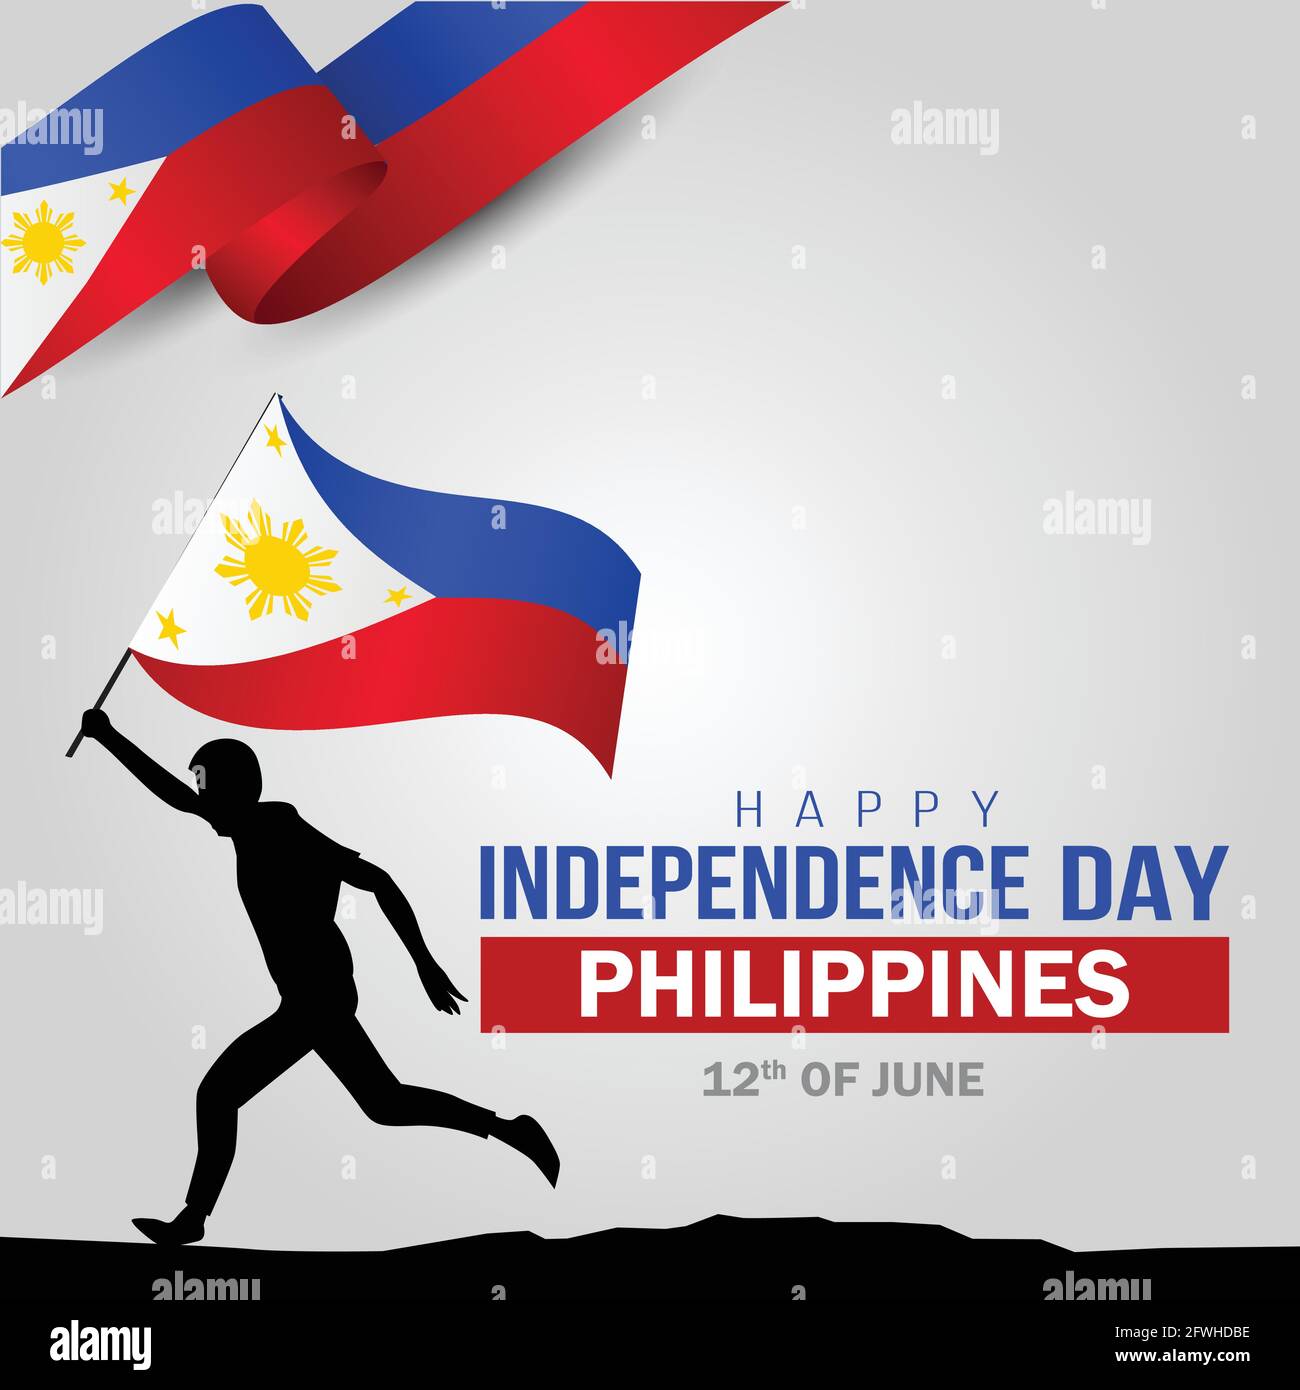 happy independence day Philippines. hands holding with Philippine flag